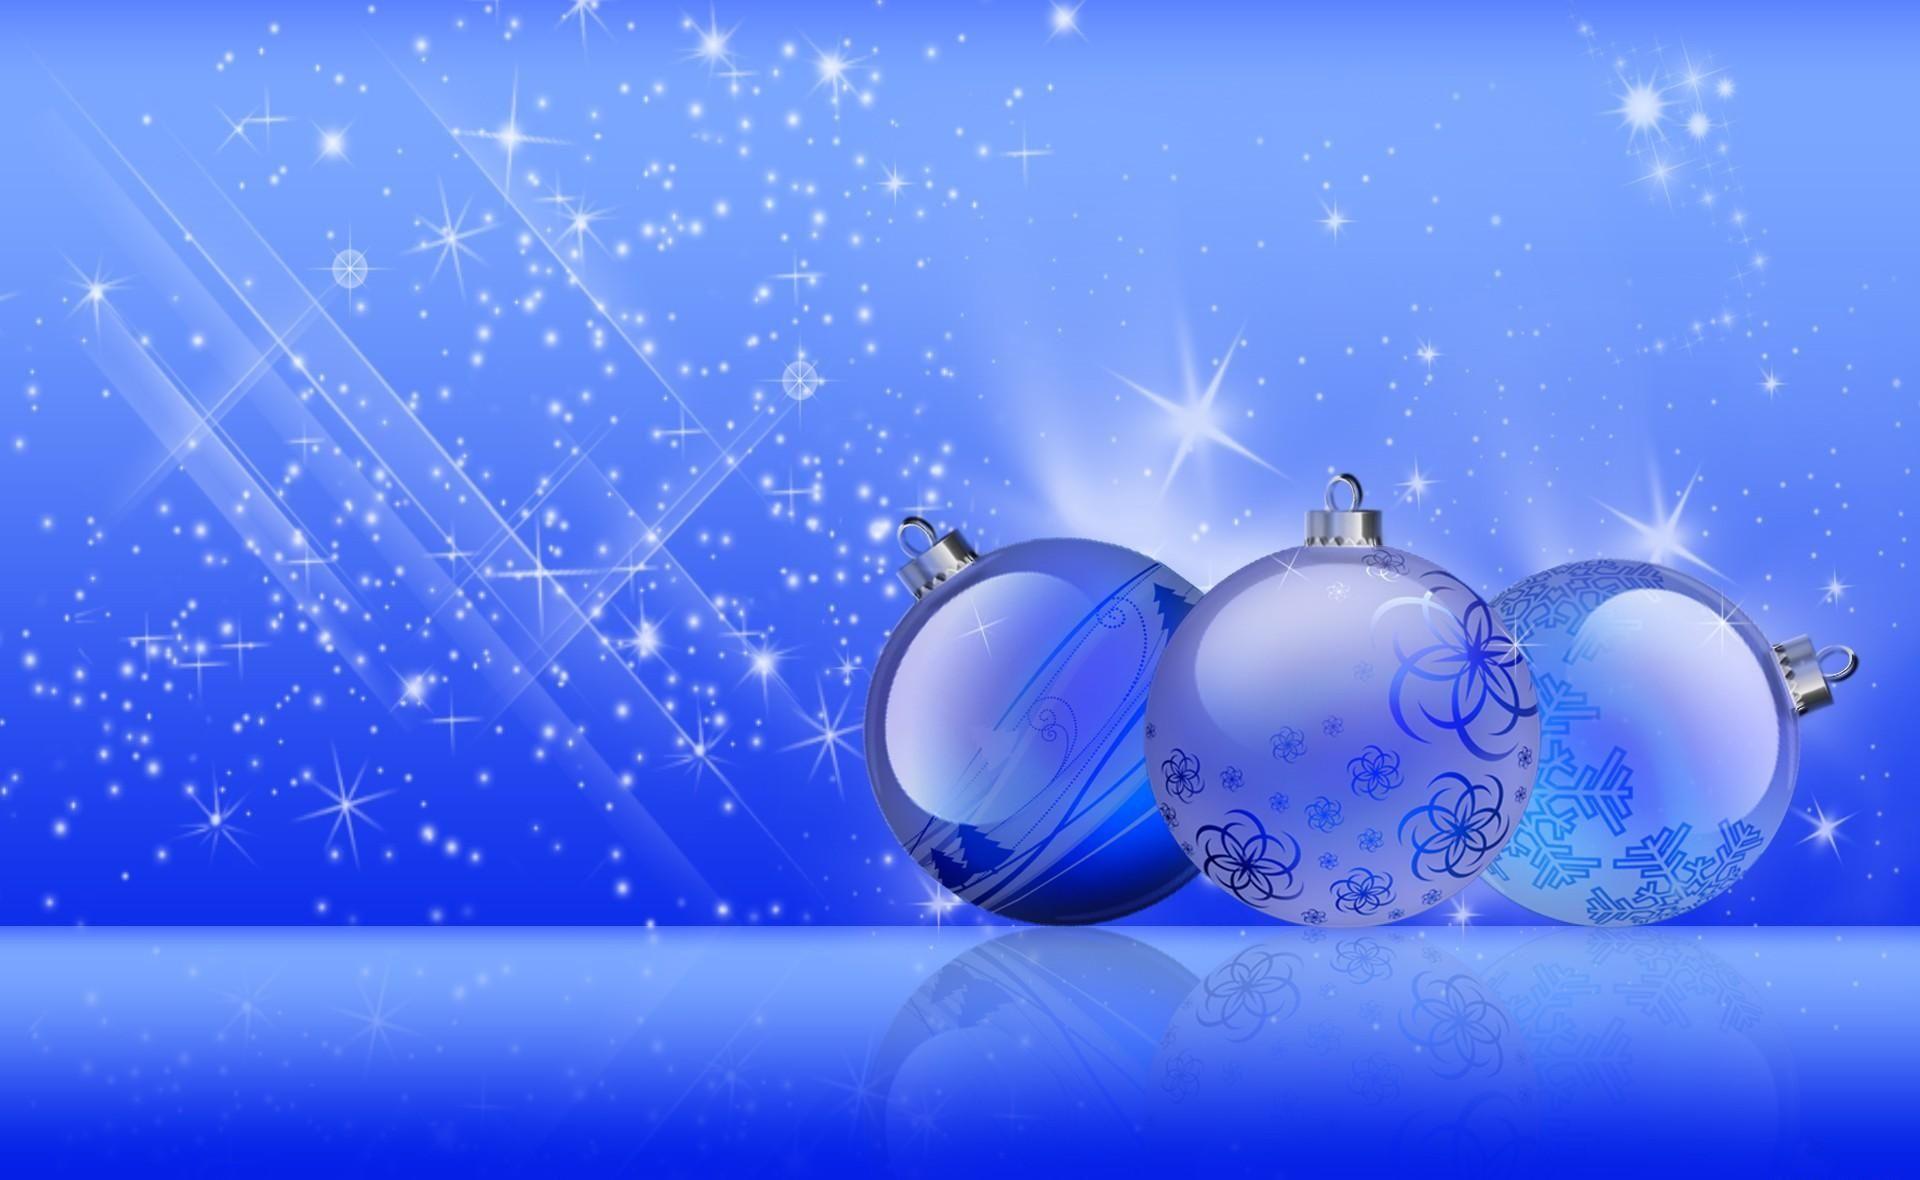 Download wallpaper 1920x1180 christmas decorations, balloons